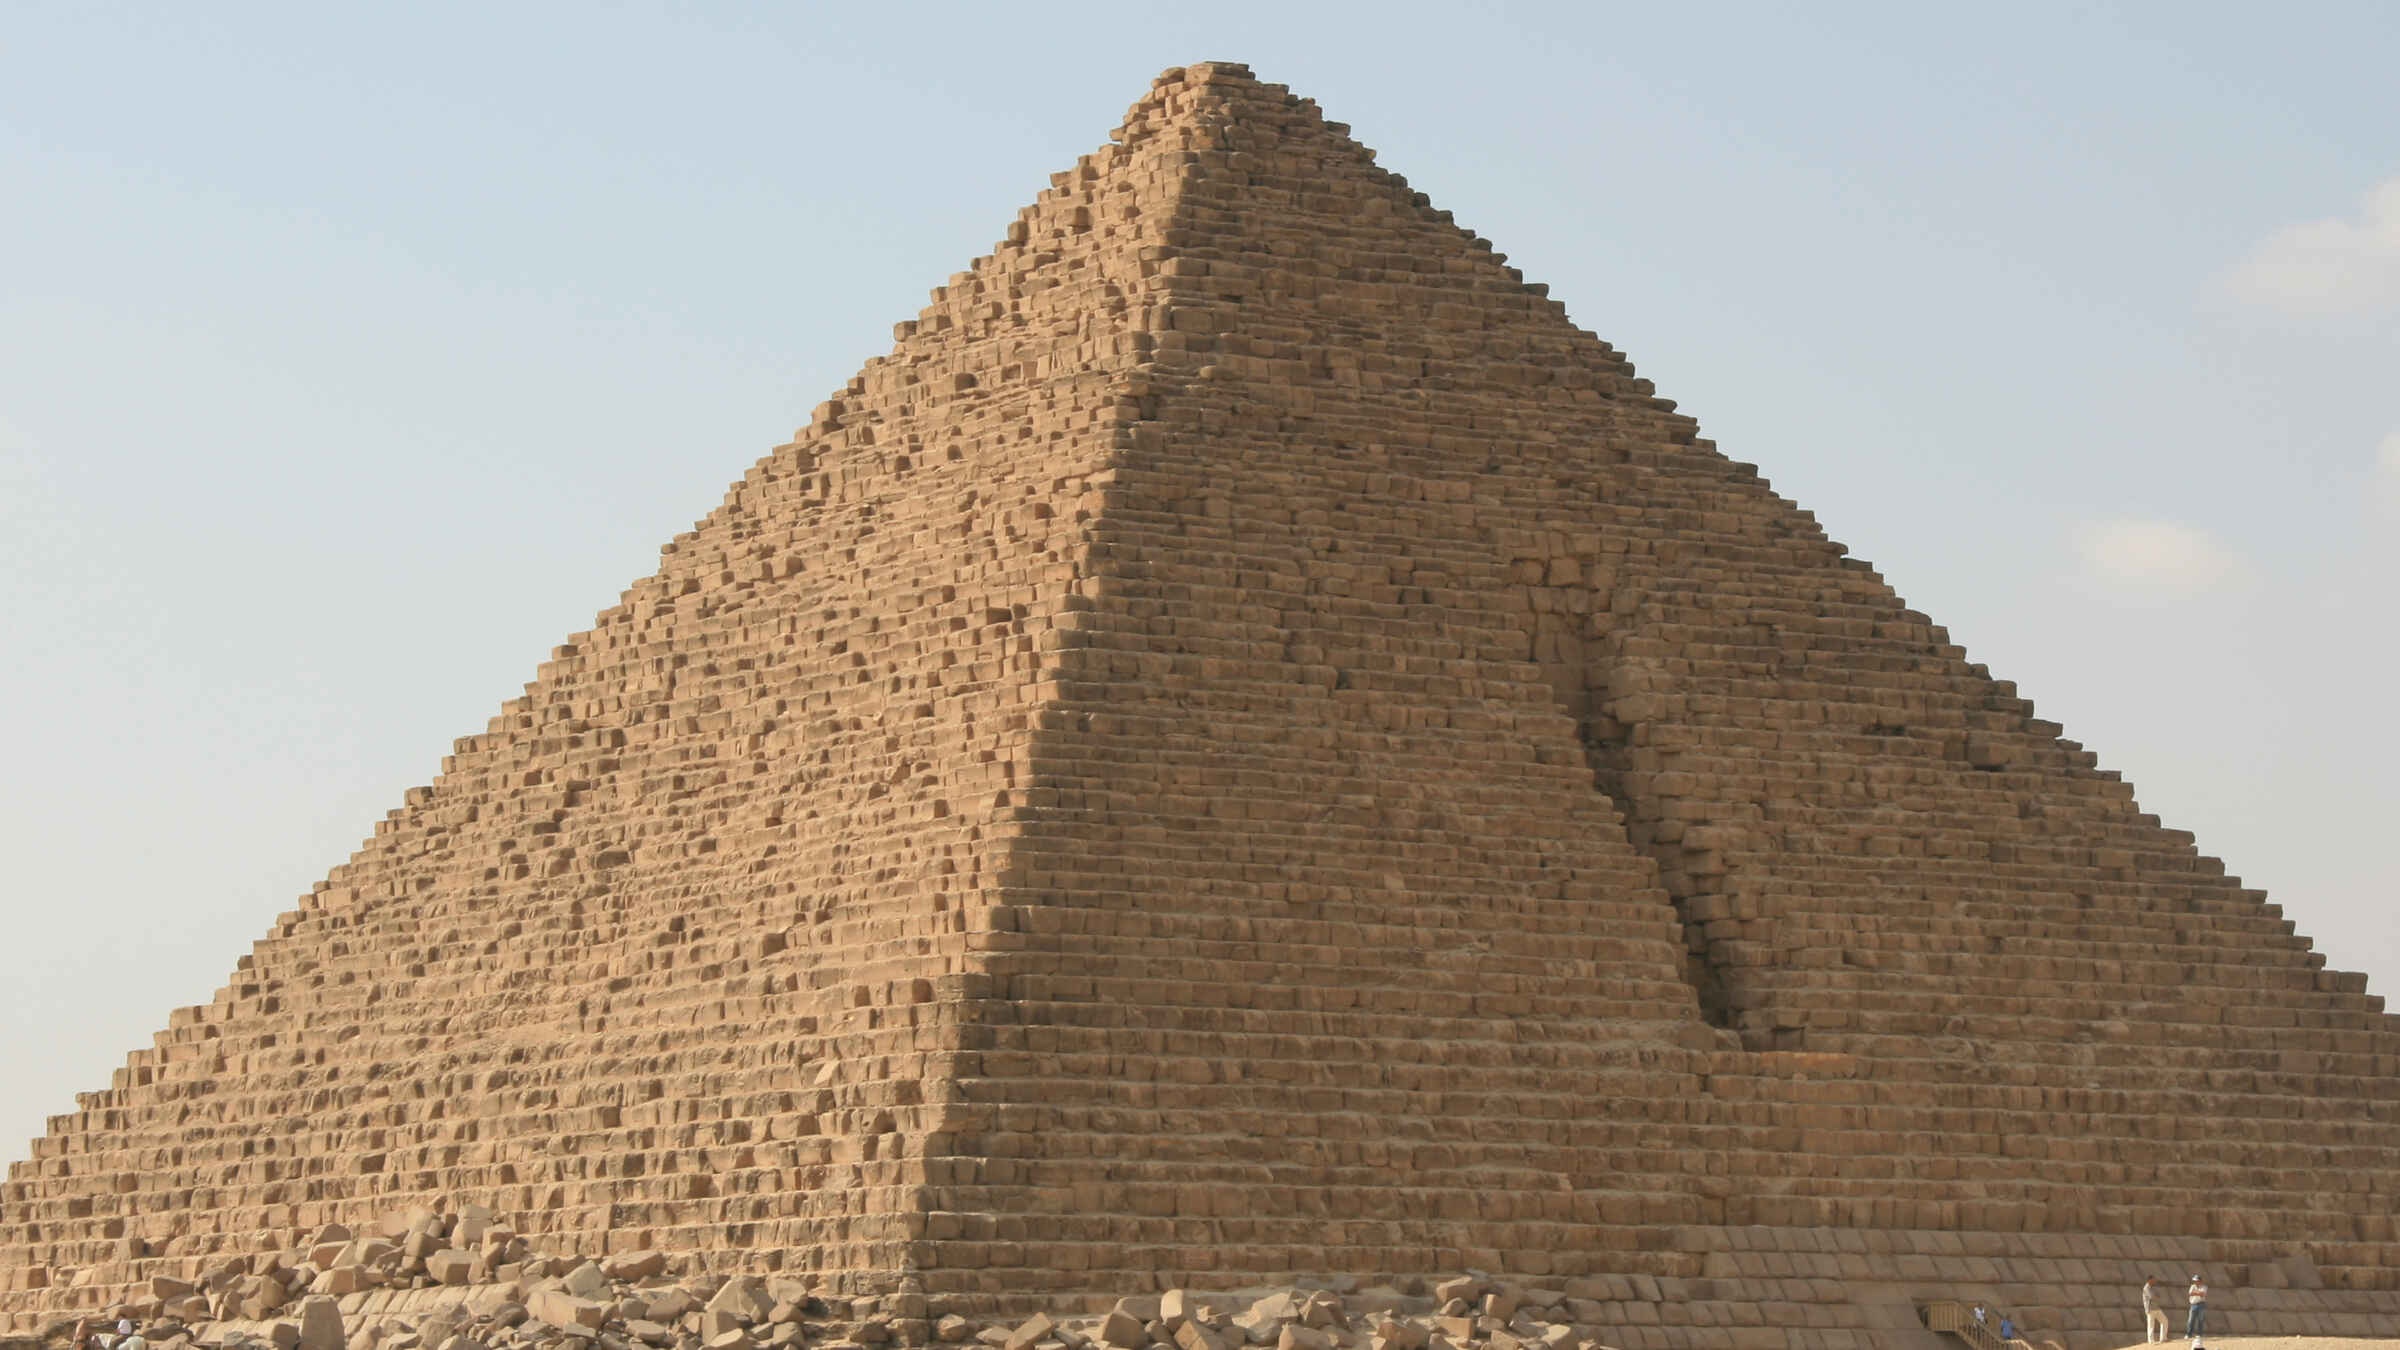 The Pyramid of Mycrenius-- Tour to Giza Pyramids and the Egyptian museum